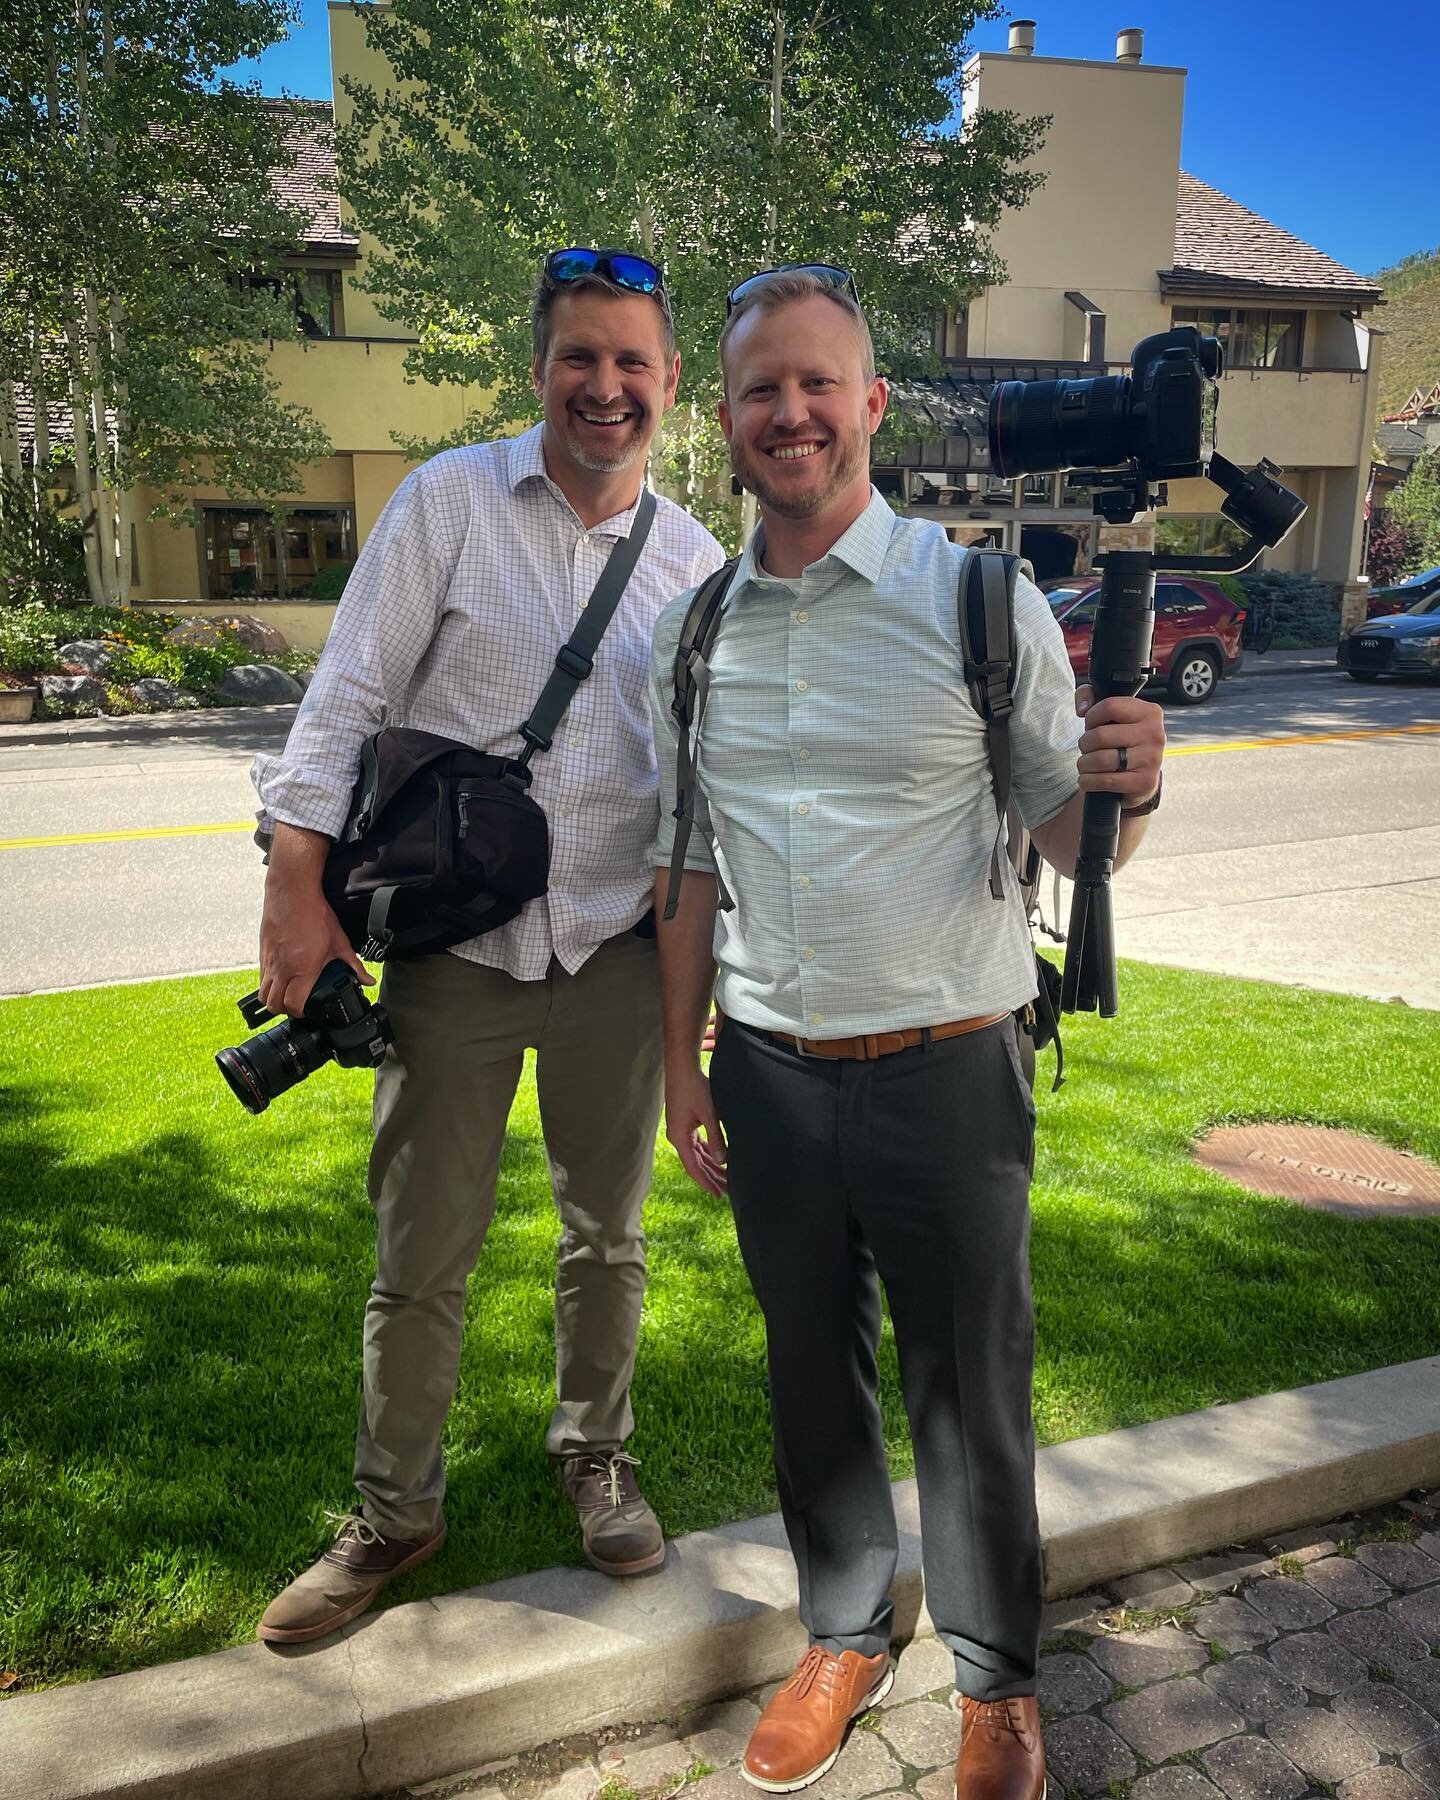 The Sharp Dressed Men of @capturetheaction ! Jeff Woods and @bhdodd making MOVES delivering the best video, and appearing stylish as they do so!